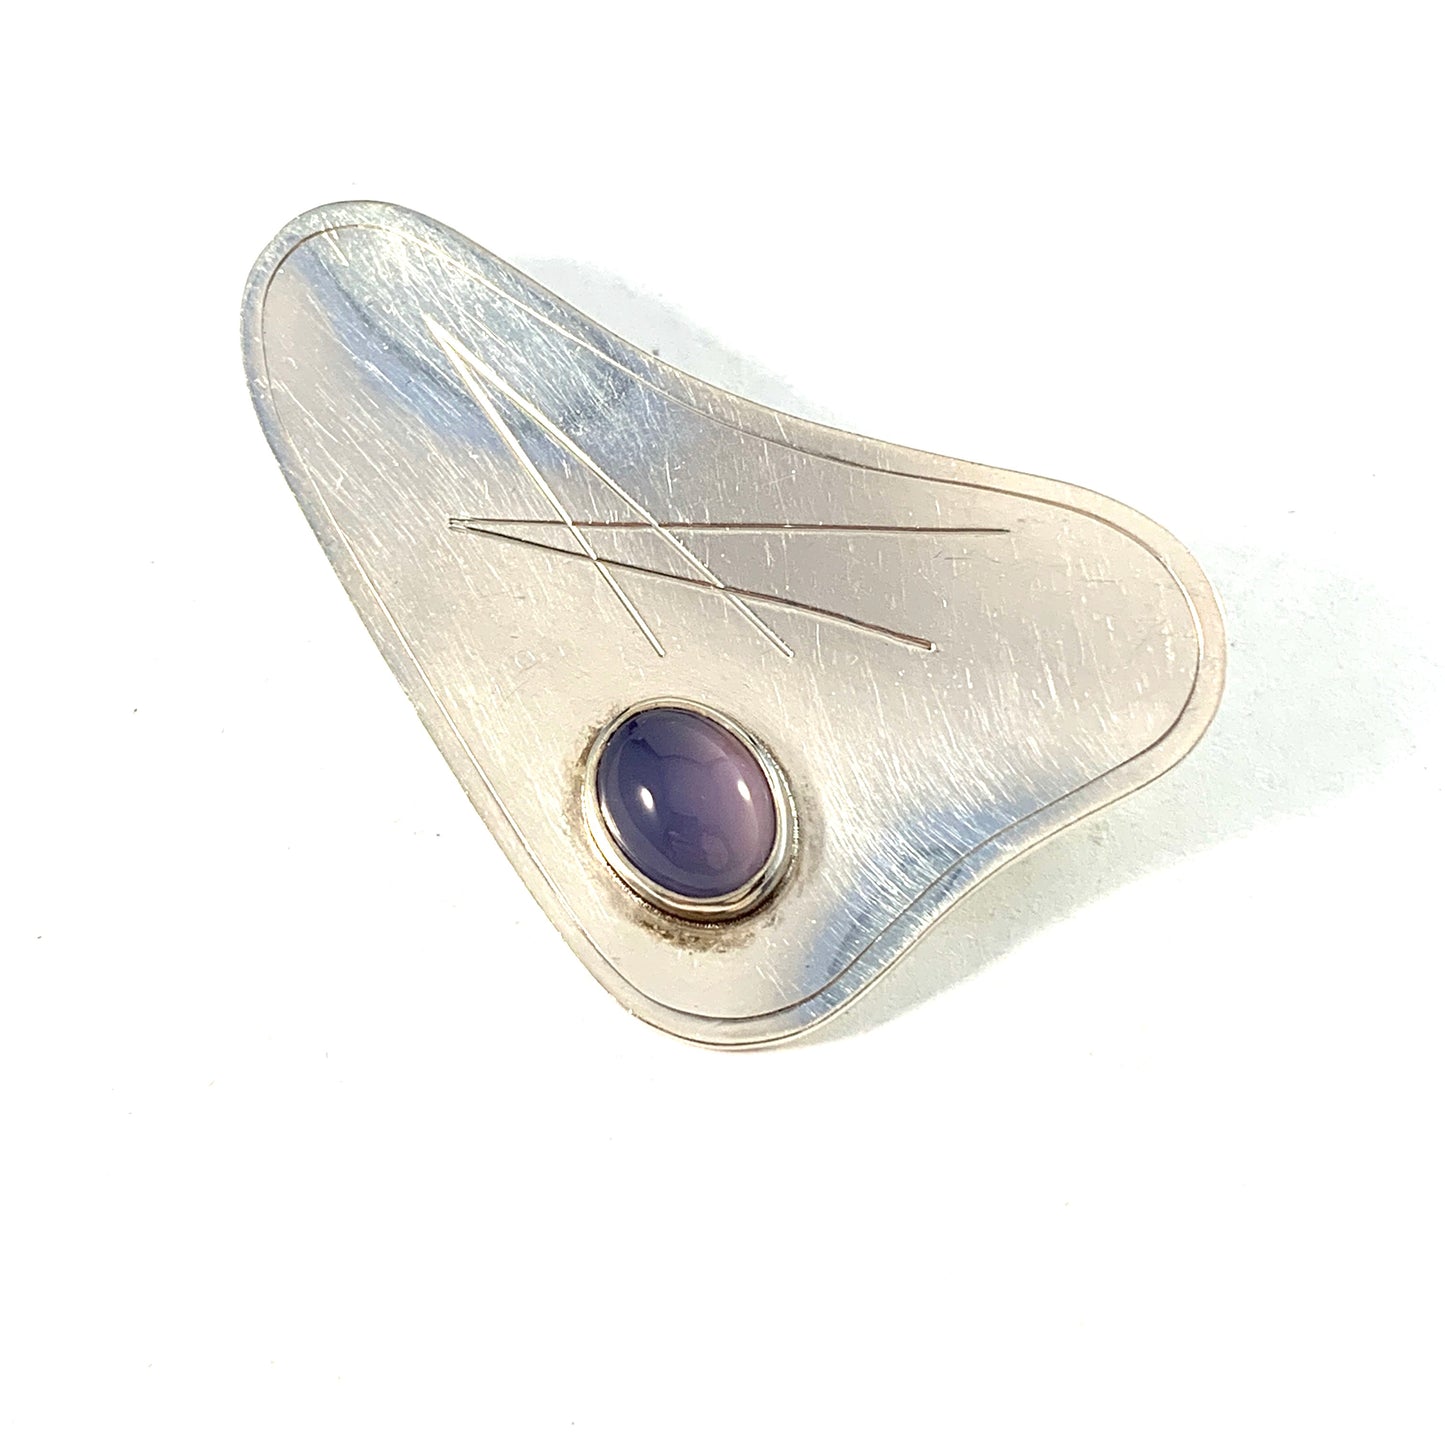 Rahlen, Sweden 1957. Mid Century Modern Sterling Silver Chalcedony Brooch. Signed.